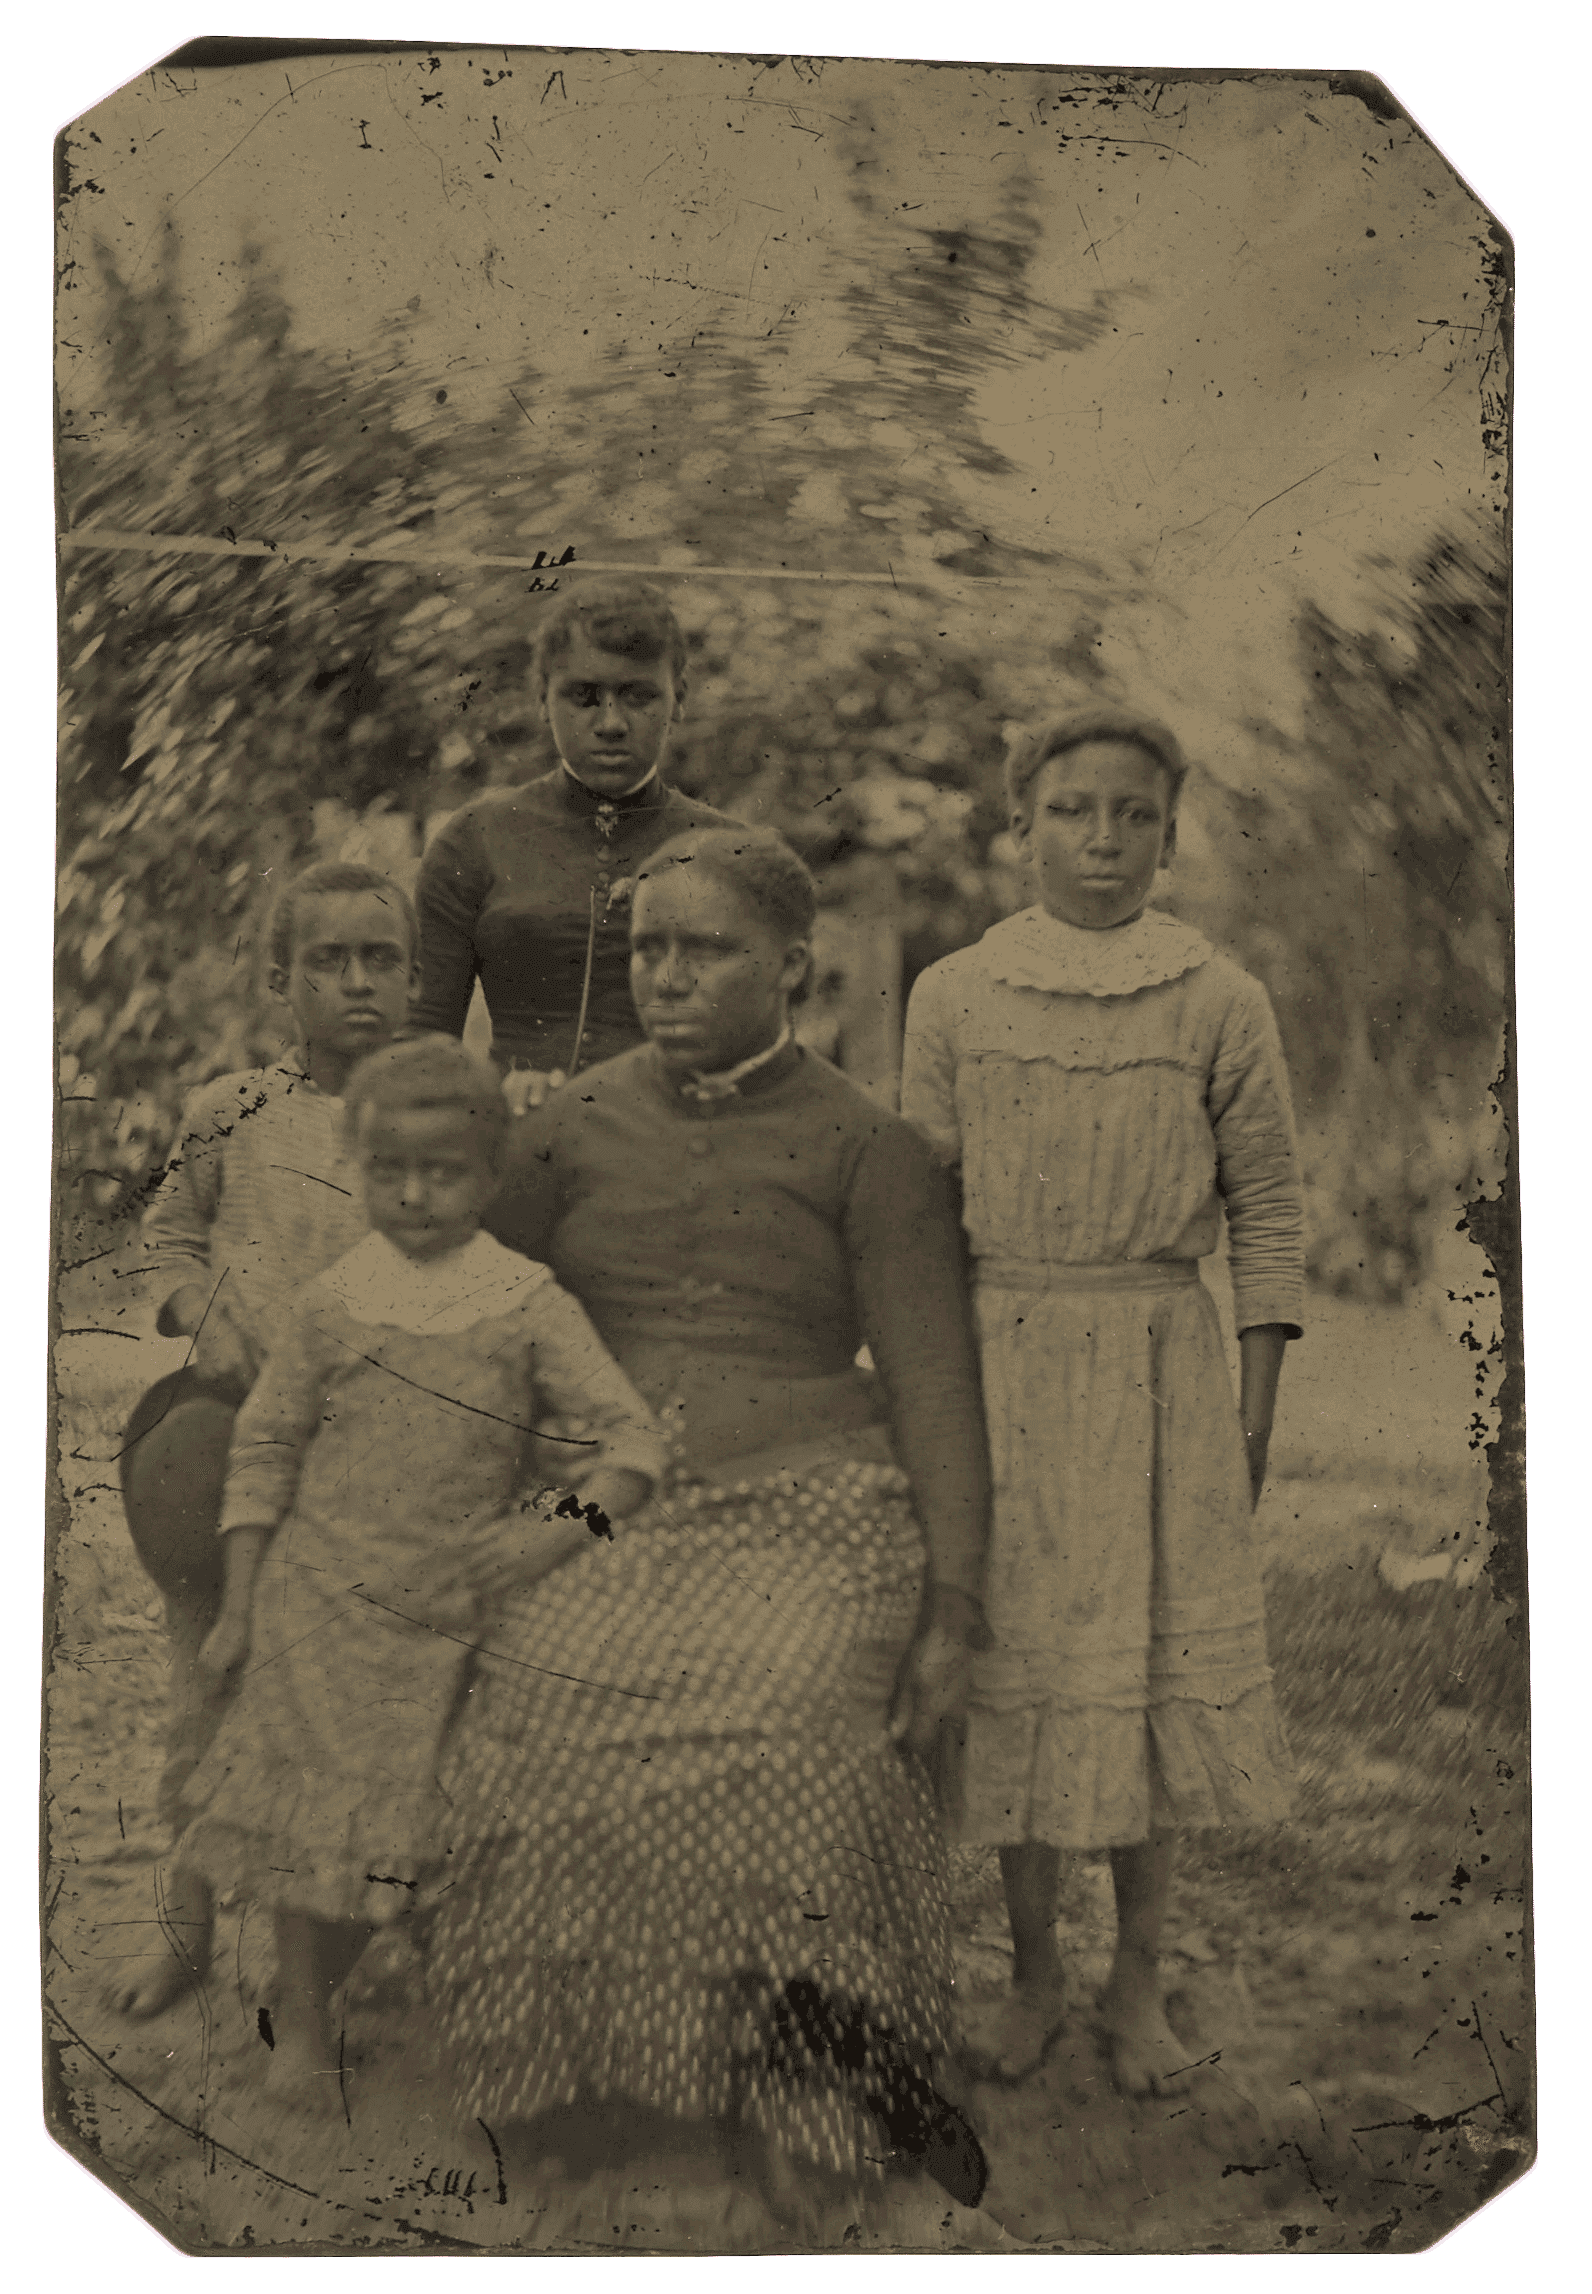 Tintype of a woman seated outside with three girls and one boy standing next to her.